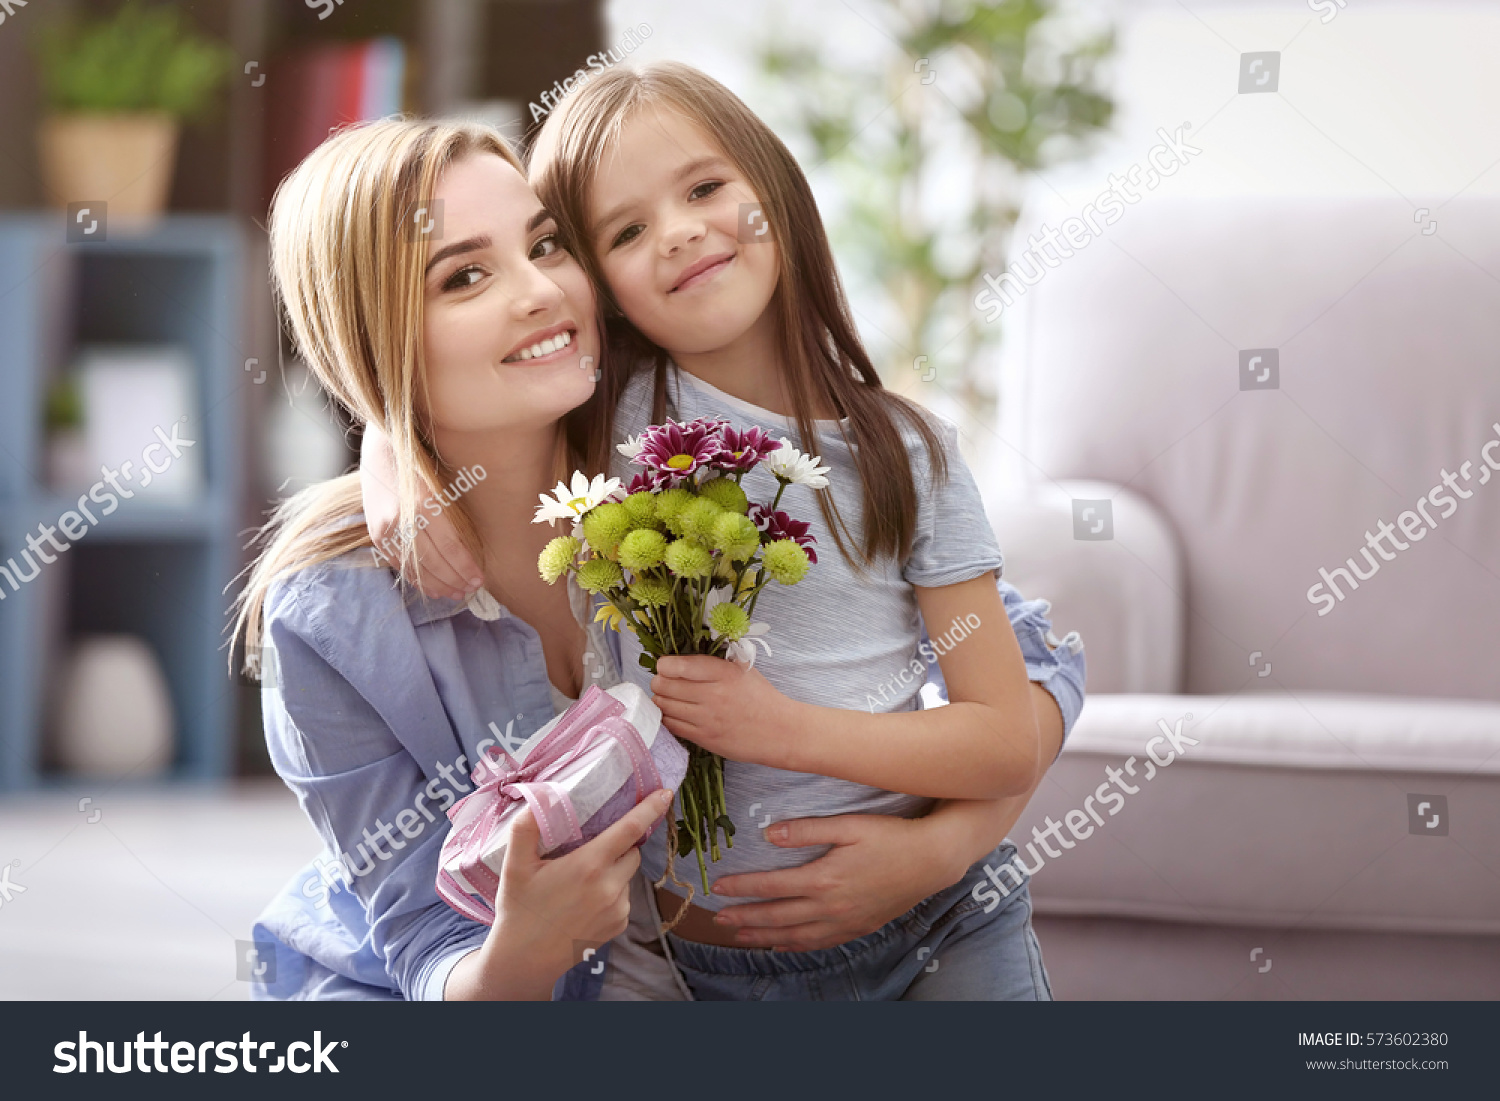 Beautiful young woman with present and bouquet of flowers from her daughter. Mother's day concept #573602380